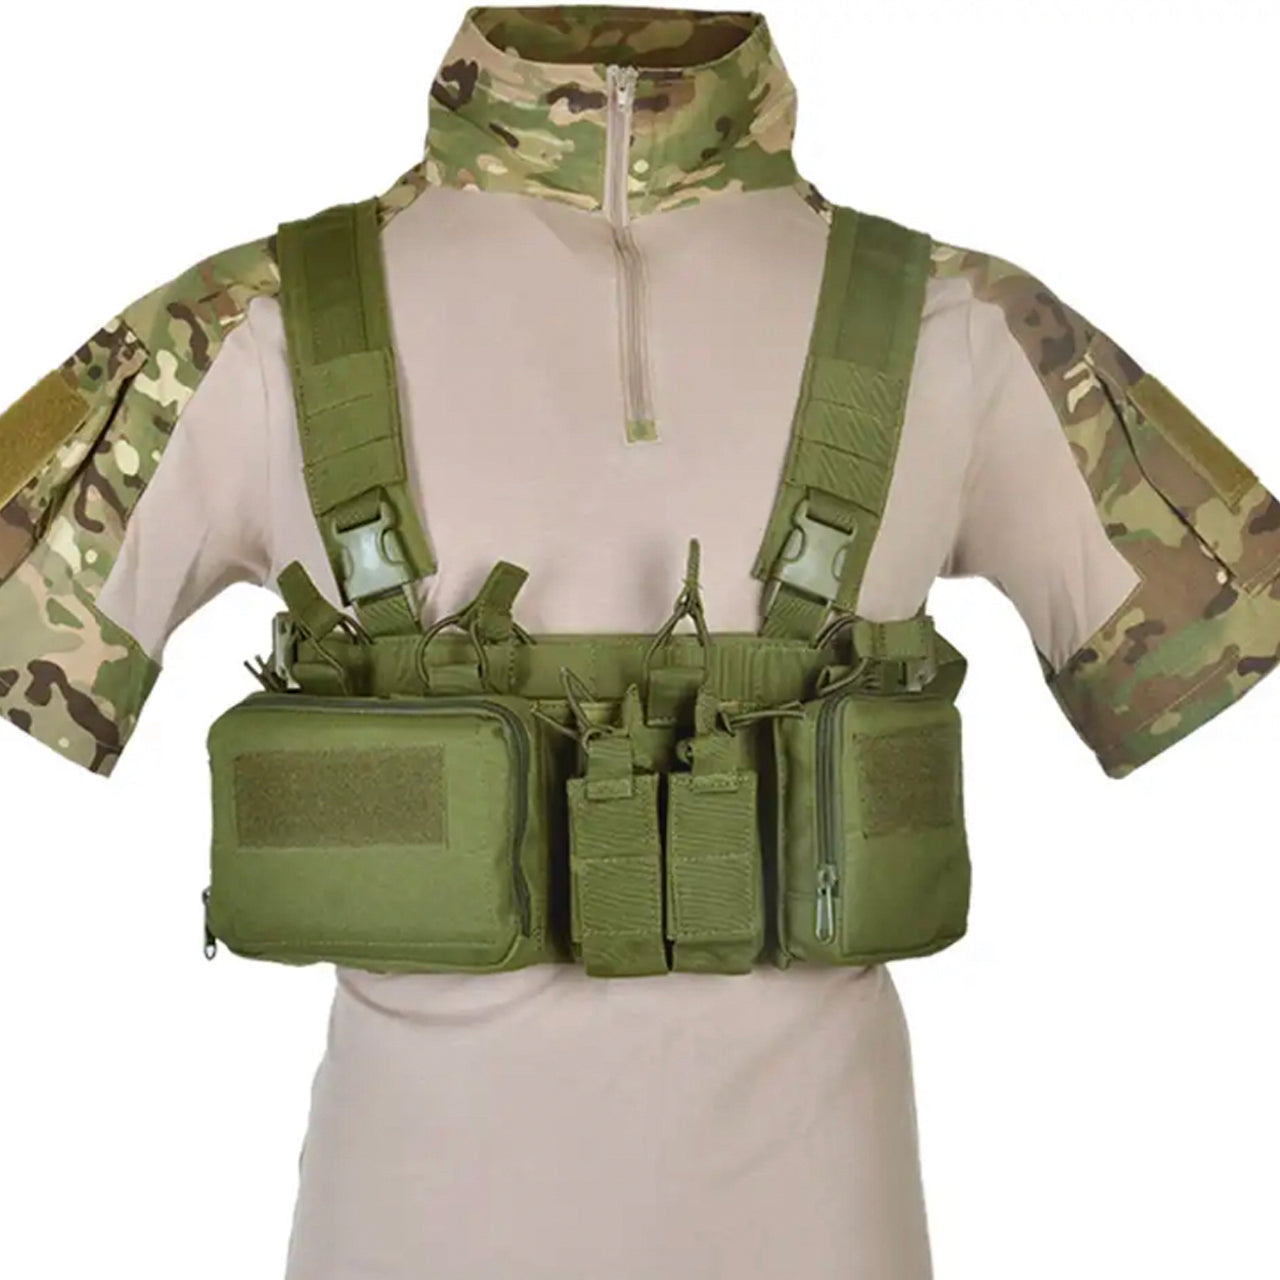 Defence Q Store Chest Rig X Harness The multi-functional assault MOLLE system combat vest is made of 600D waterproof oxford cloth. The fabric has high precision and strong functionality which is more suitable for outdoor activities. Great for Military, cadets, airsoft and other outdoor activities www.defenceqstore.com.au